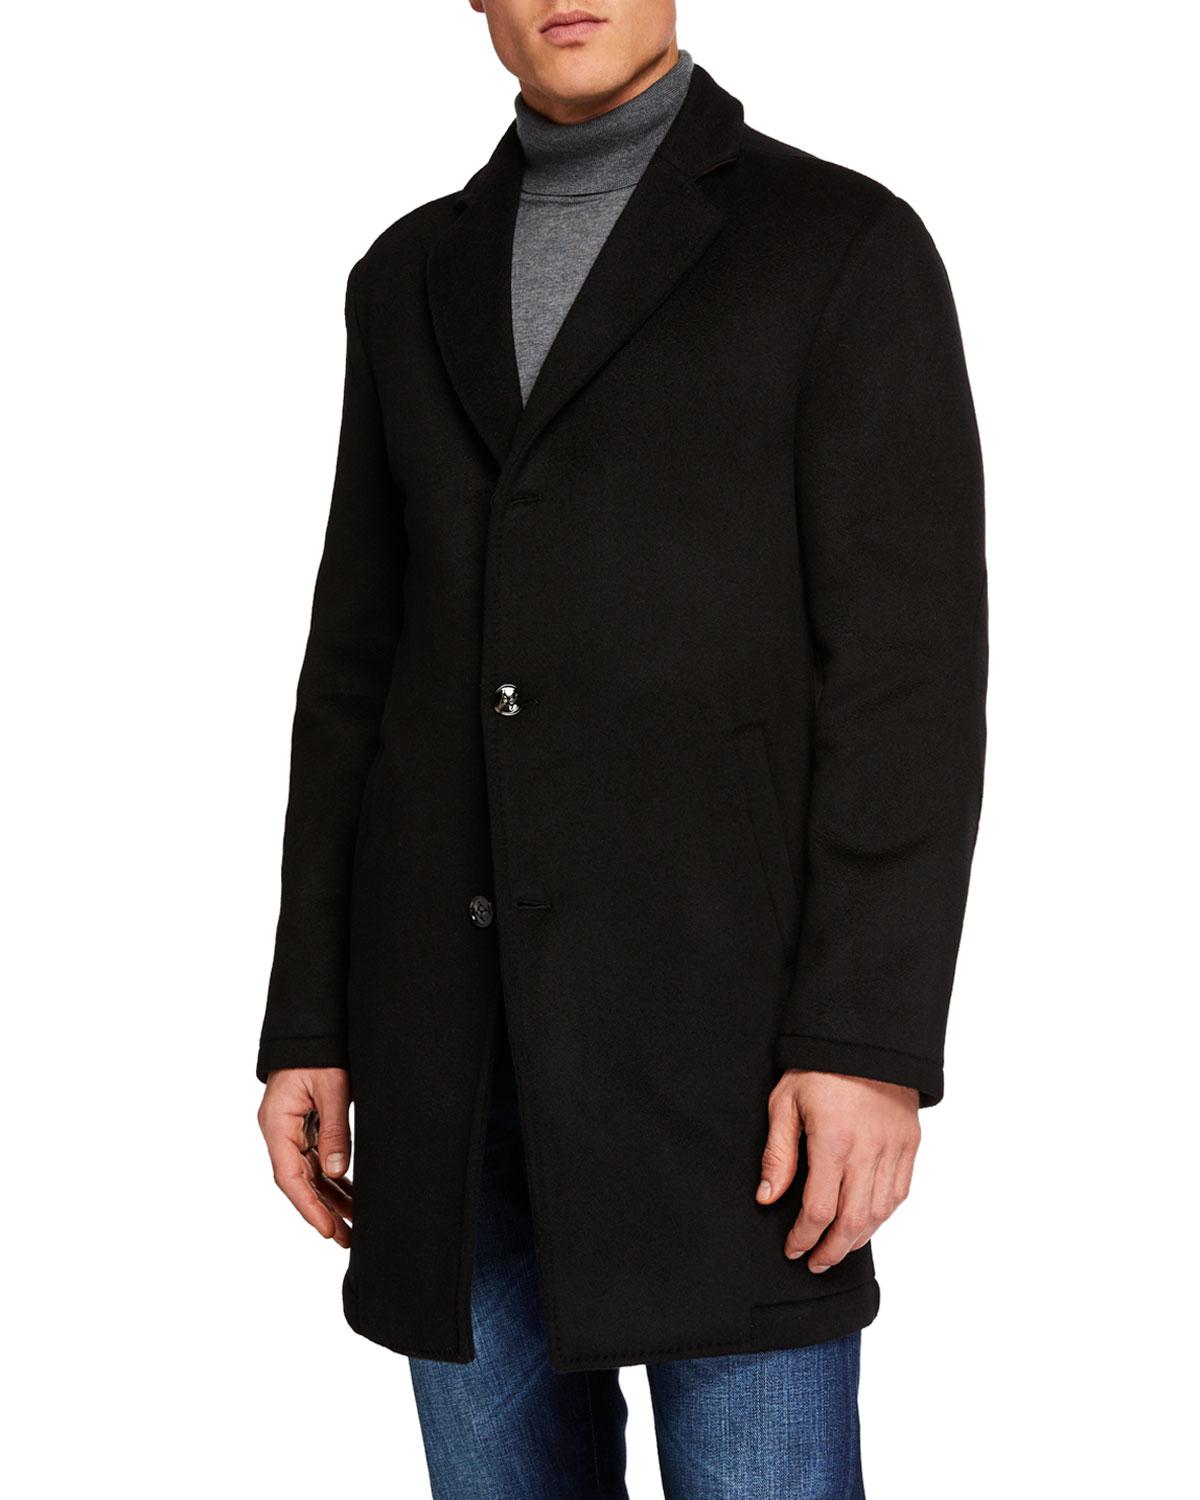 Lyst - Kiton Men's Cashmere Single Breasted Coat in Black for Men